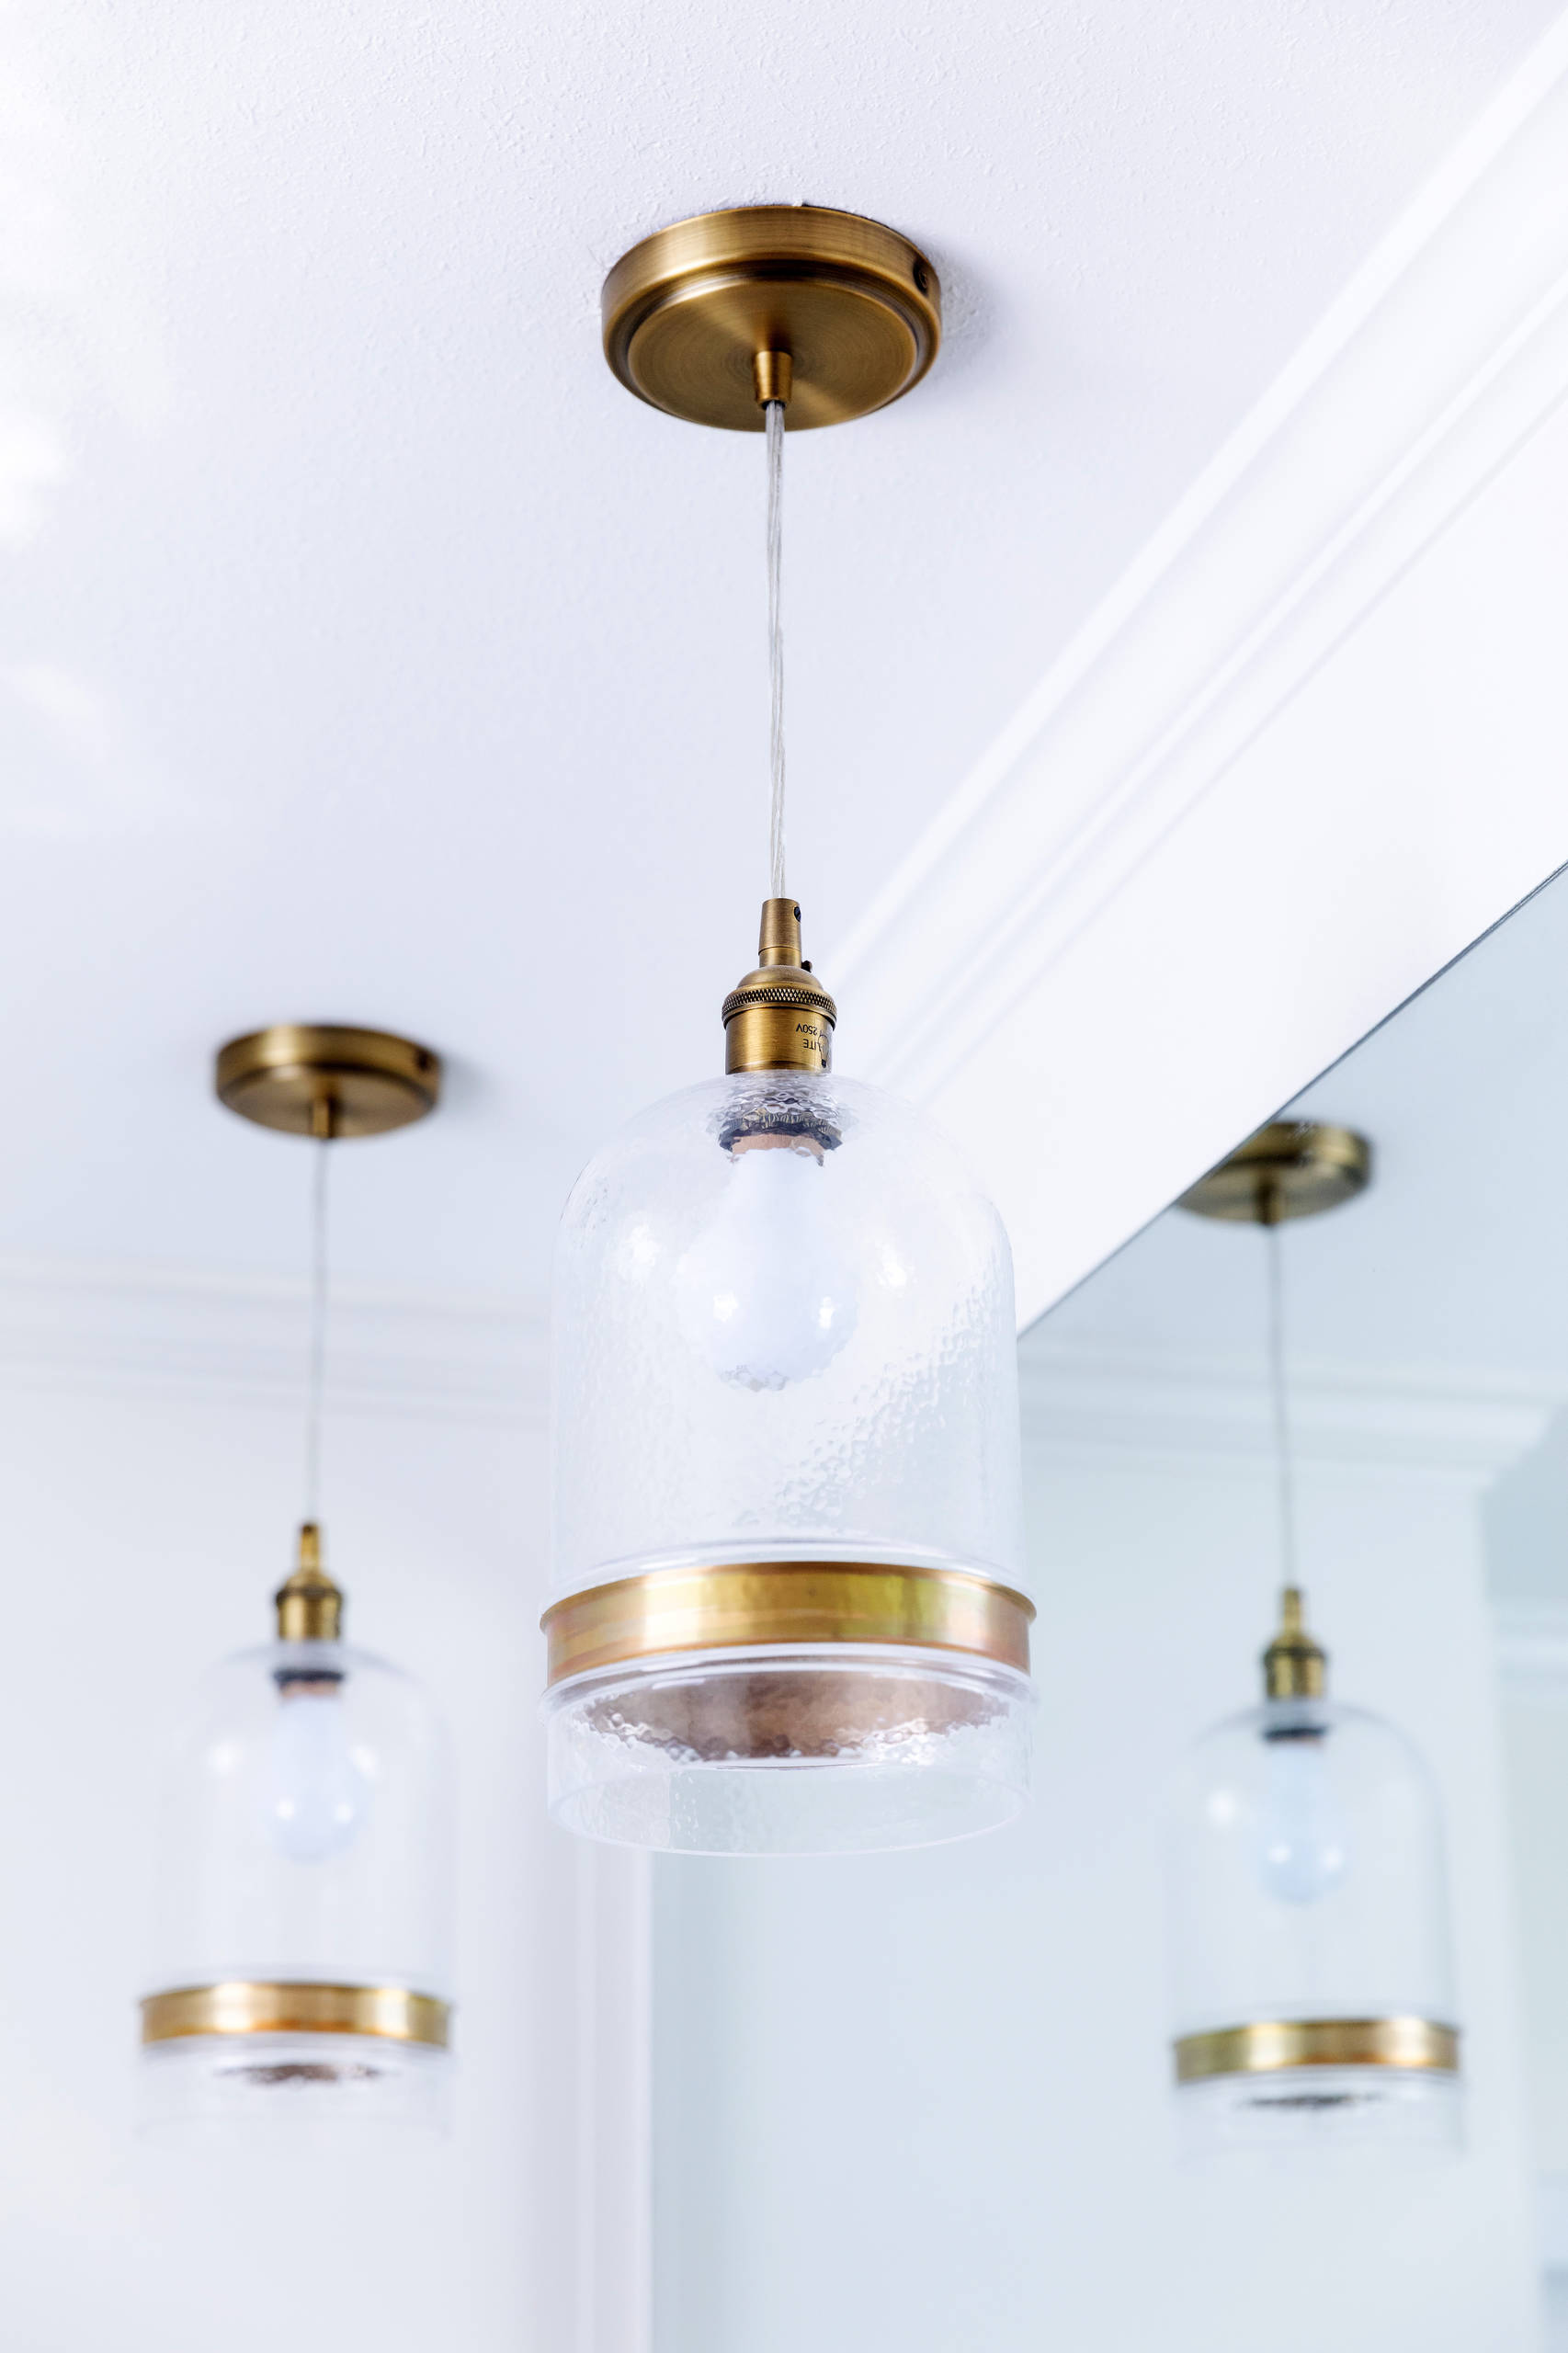 Close up of glass pendant lights with antique copper accents used above the vanities. Space Planning by Ourso Designs. Photo by Collin Richie (Collin Richie Photography).